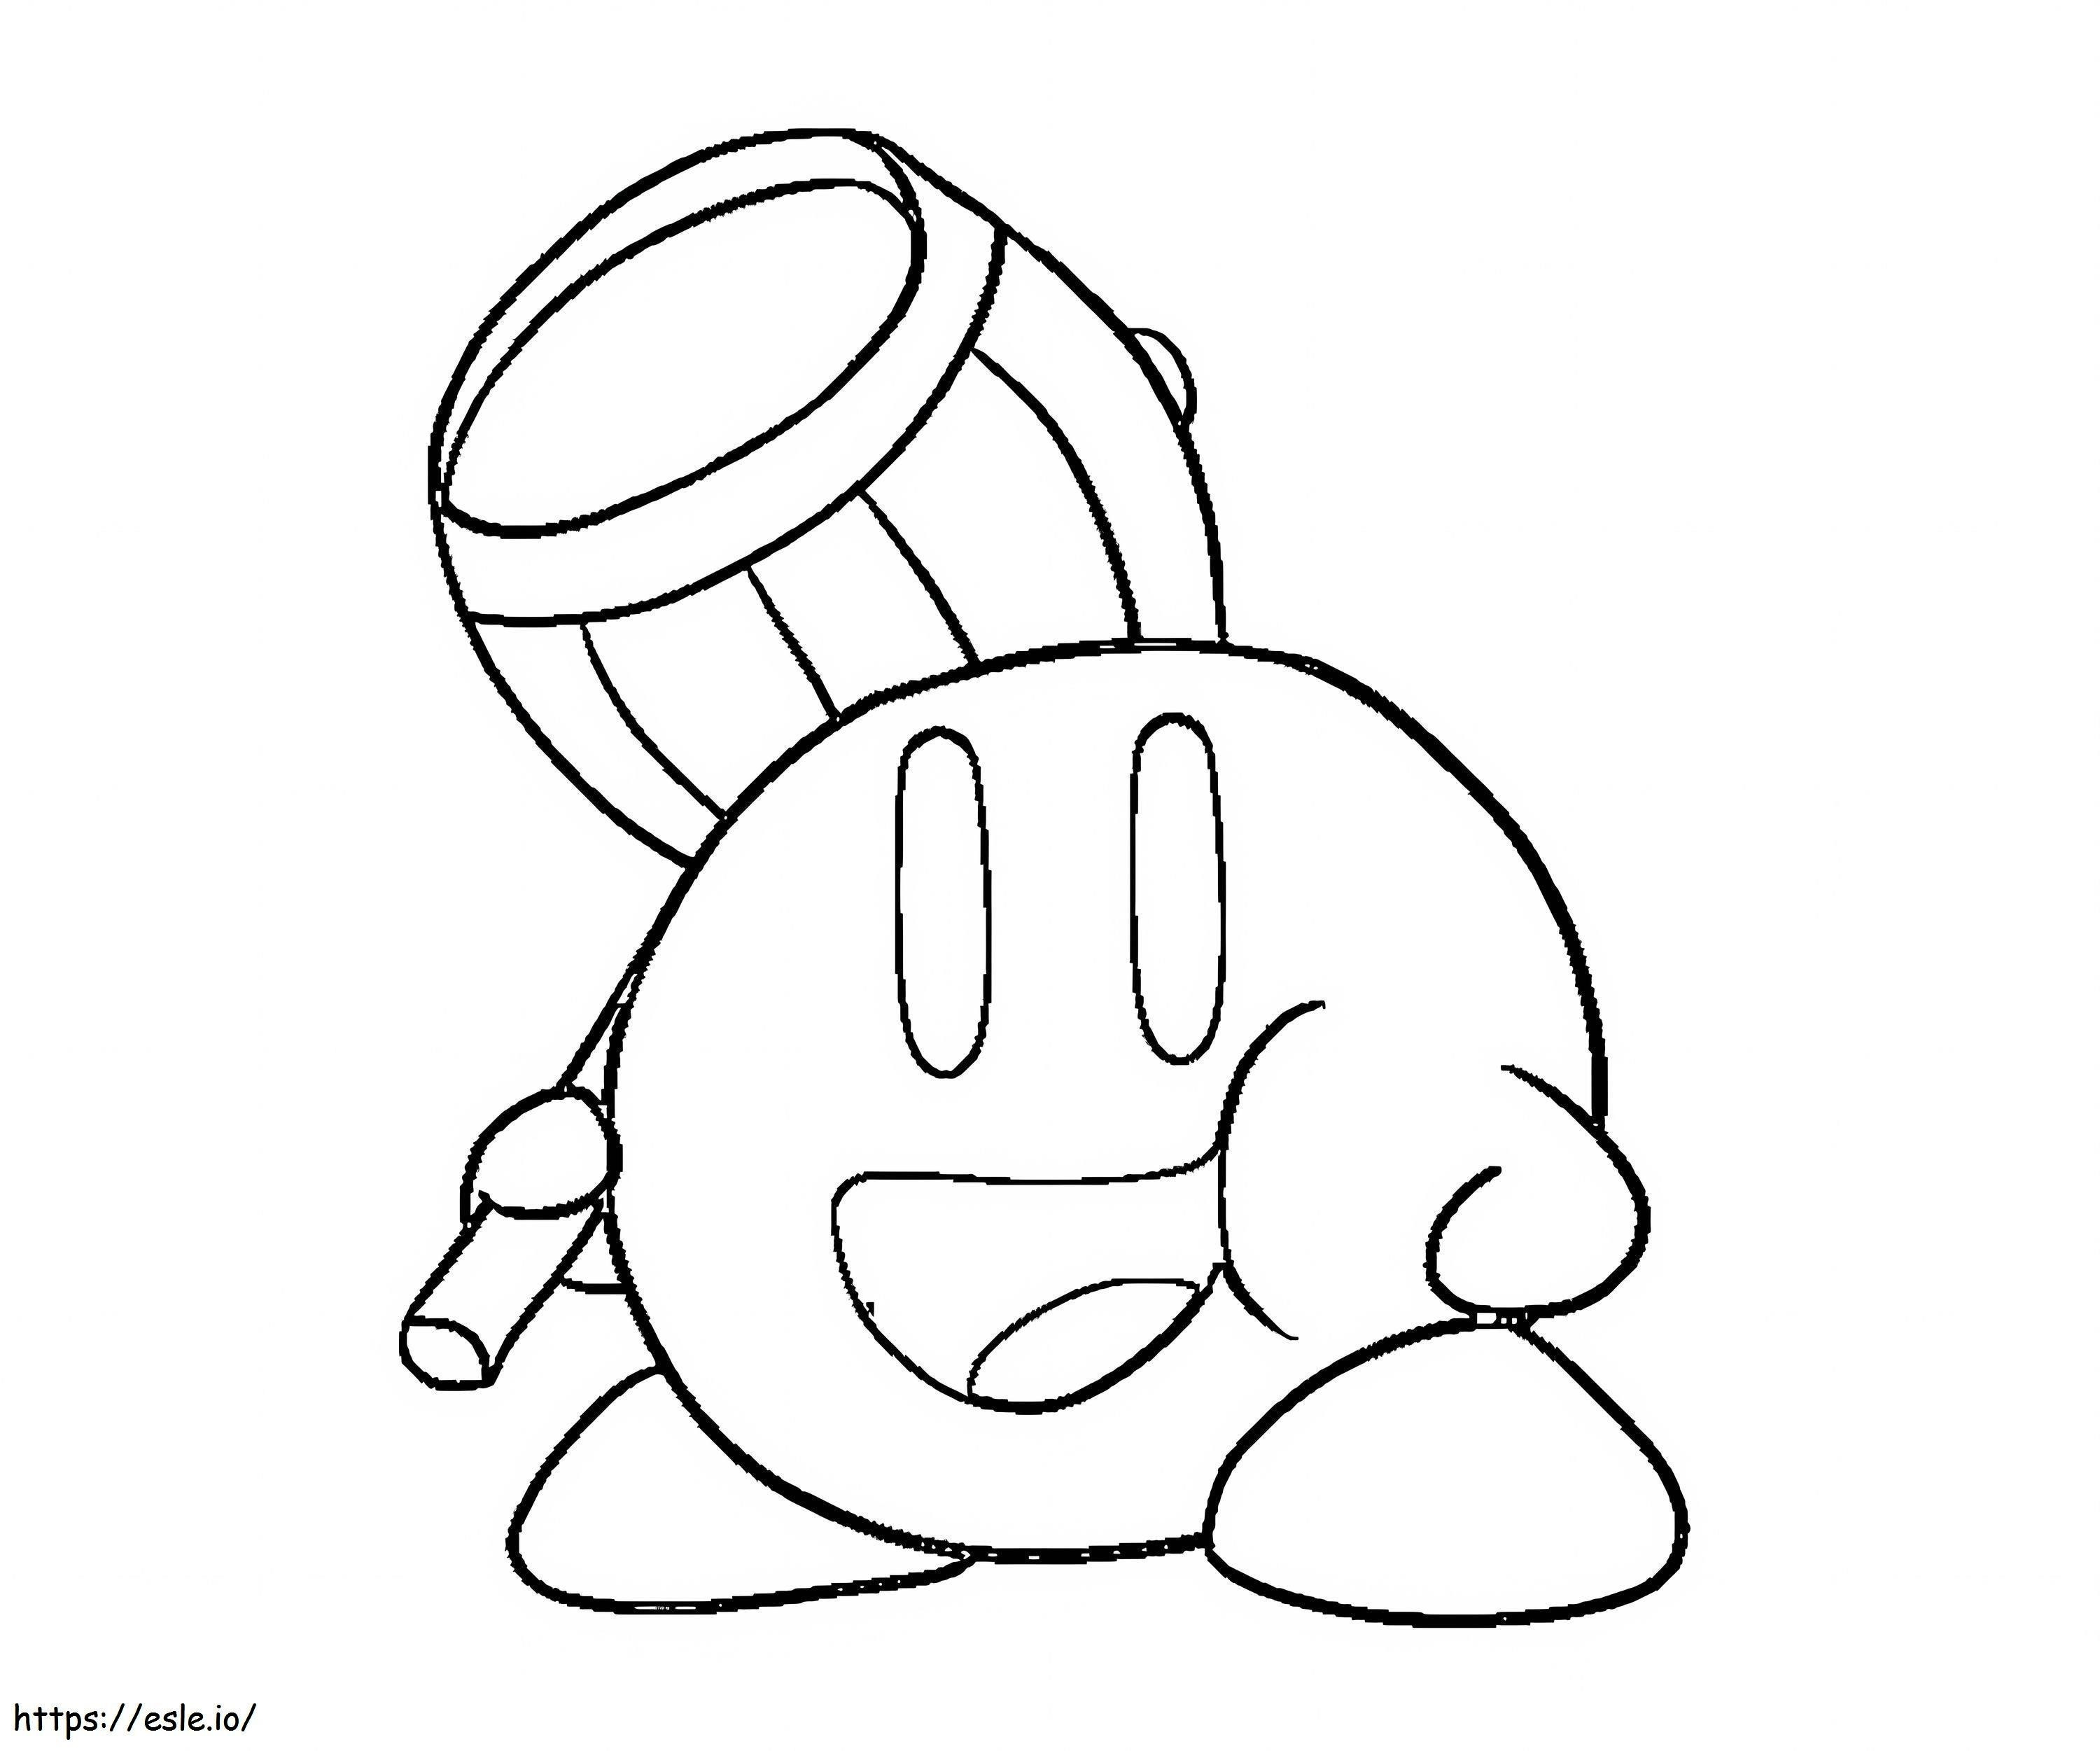 Draw Kirby Holding A Hammer coloring page